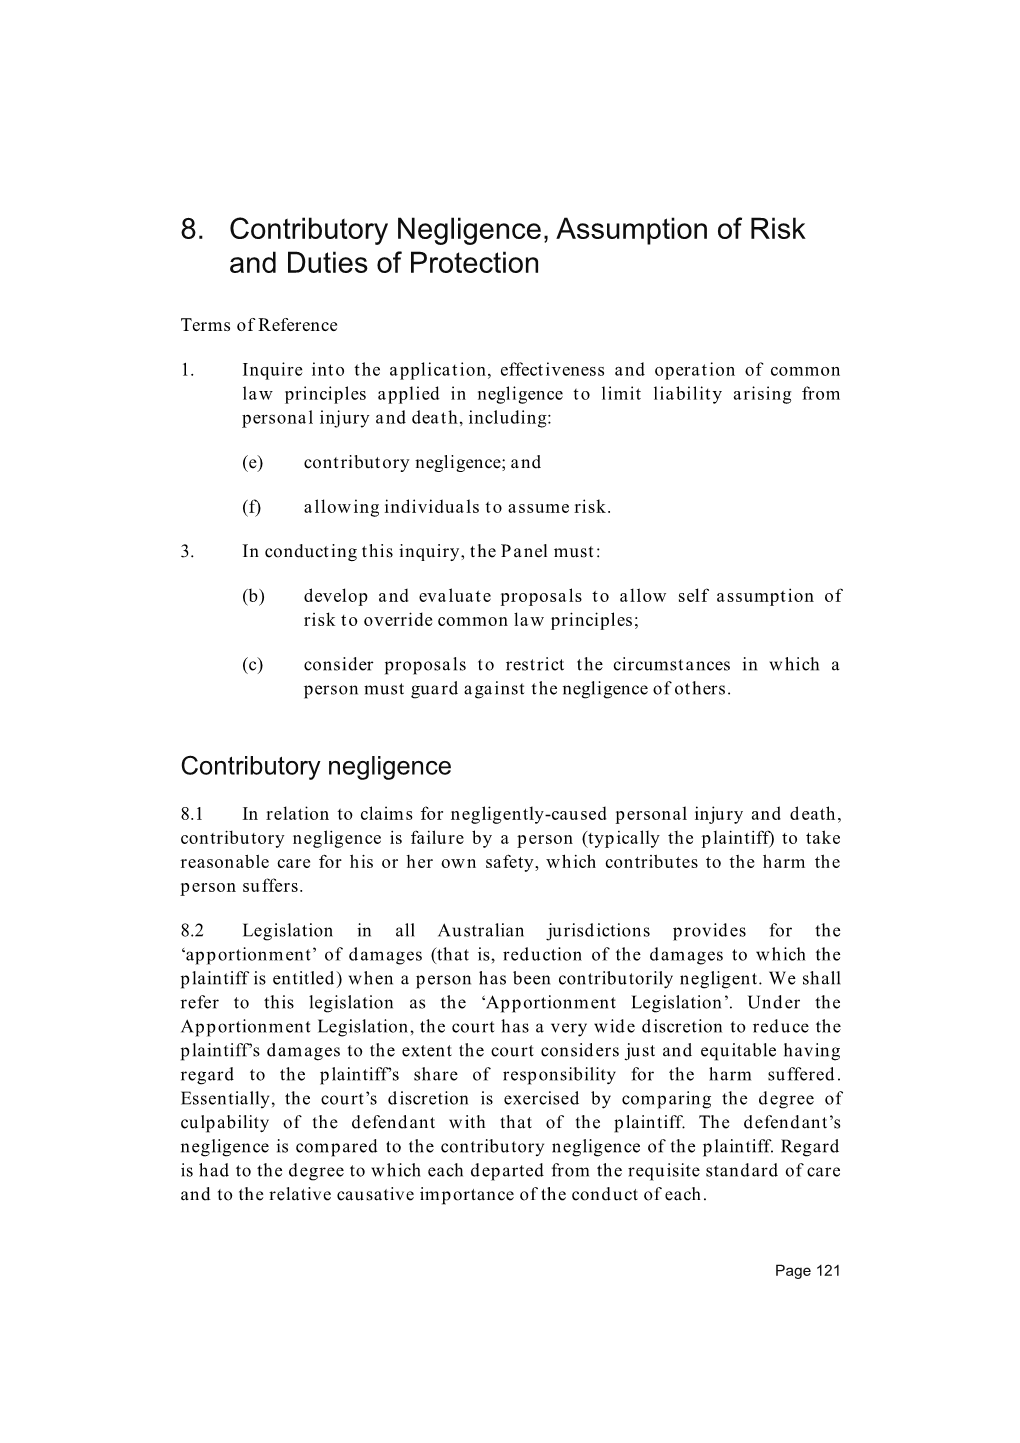 8. Contributory Negligence, Assumption of Risk and Duties of Protection